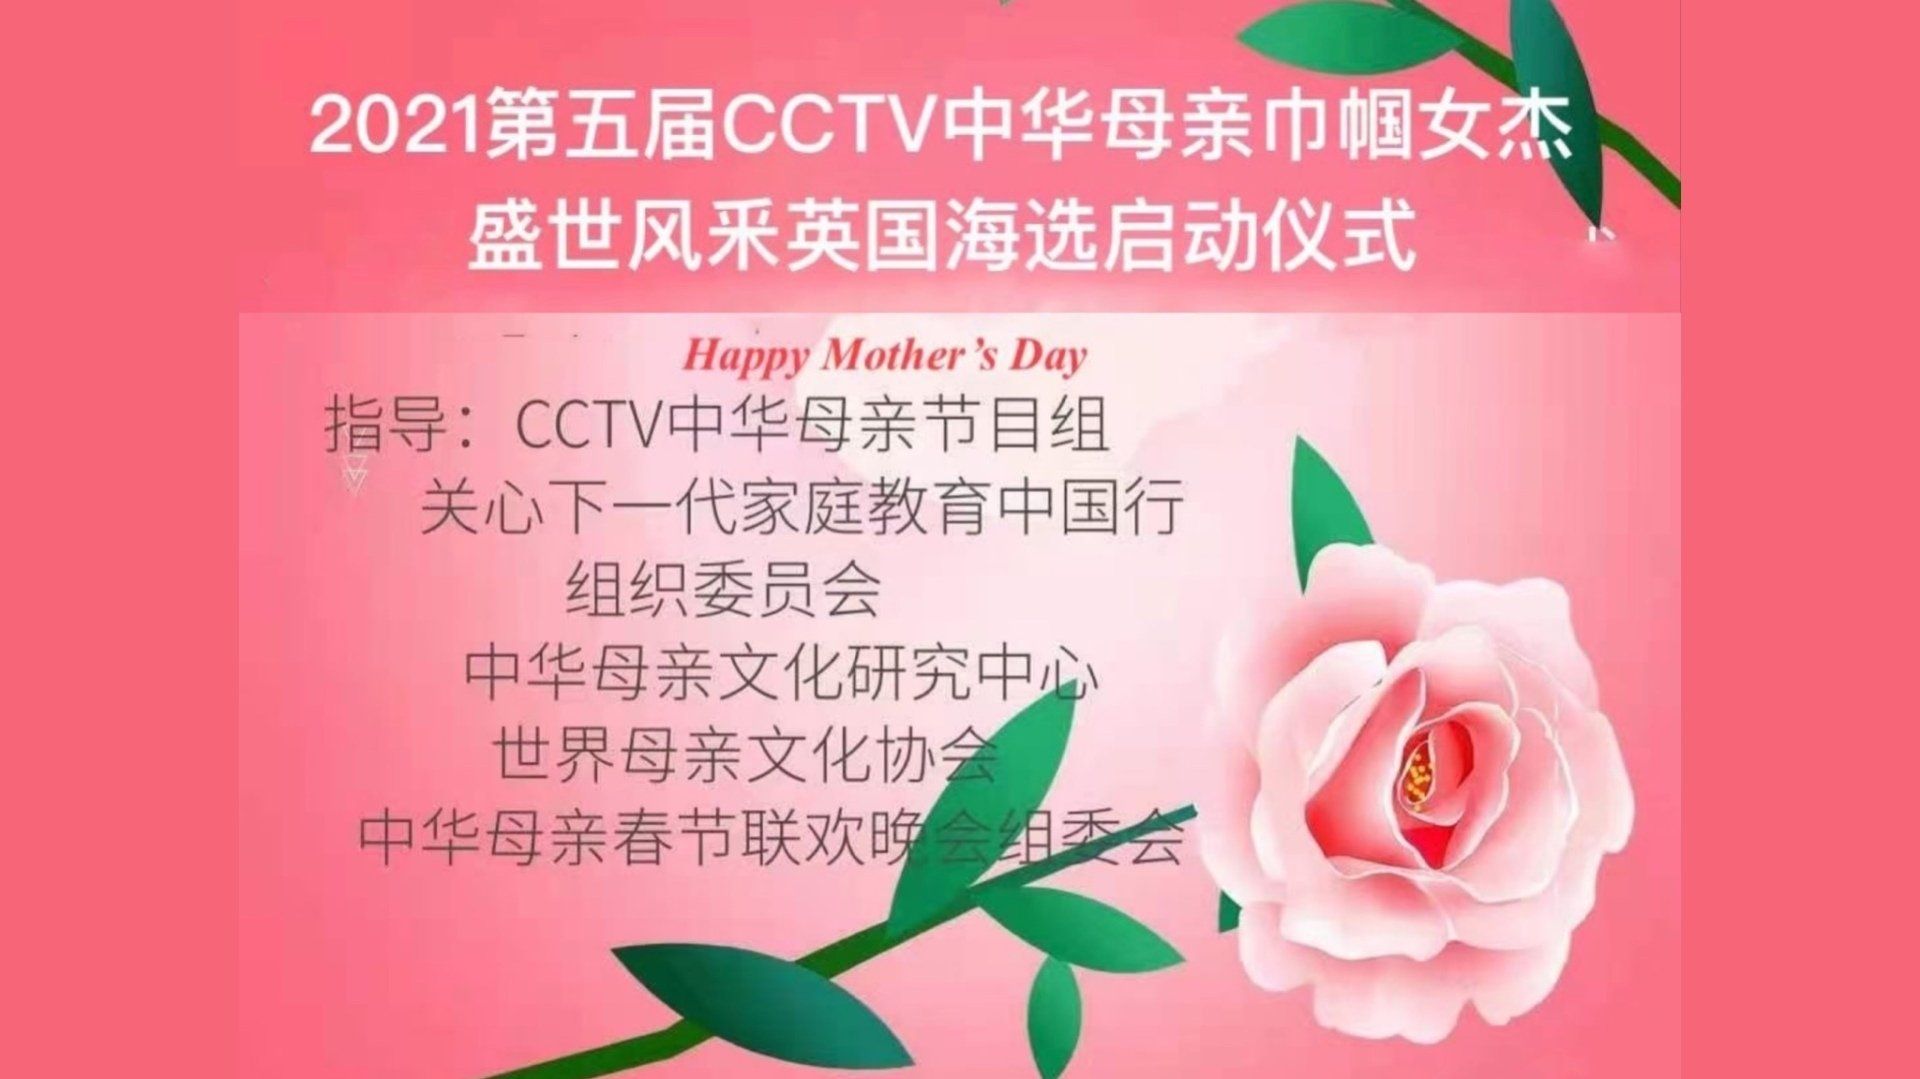 CCTV Chinese Mother and Heroine Contest praises  virtue of mother